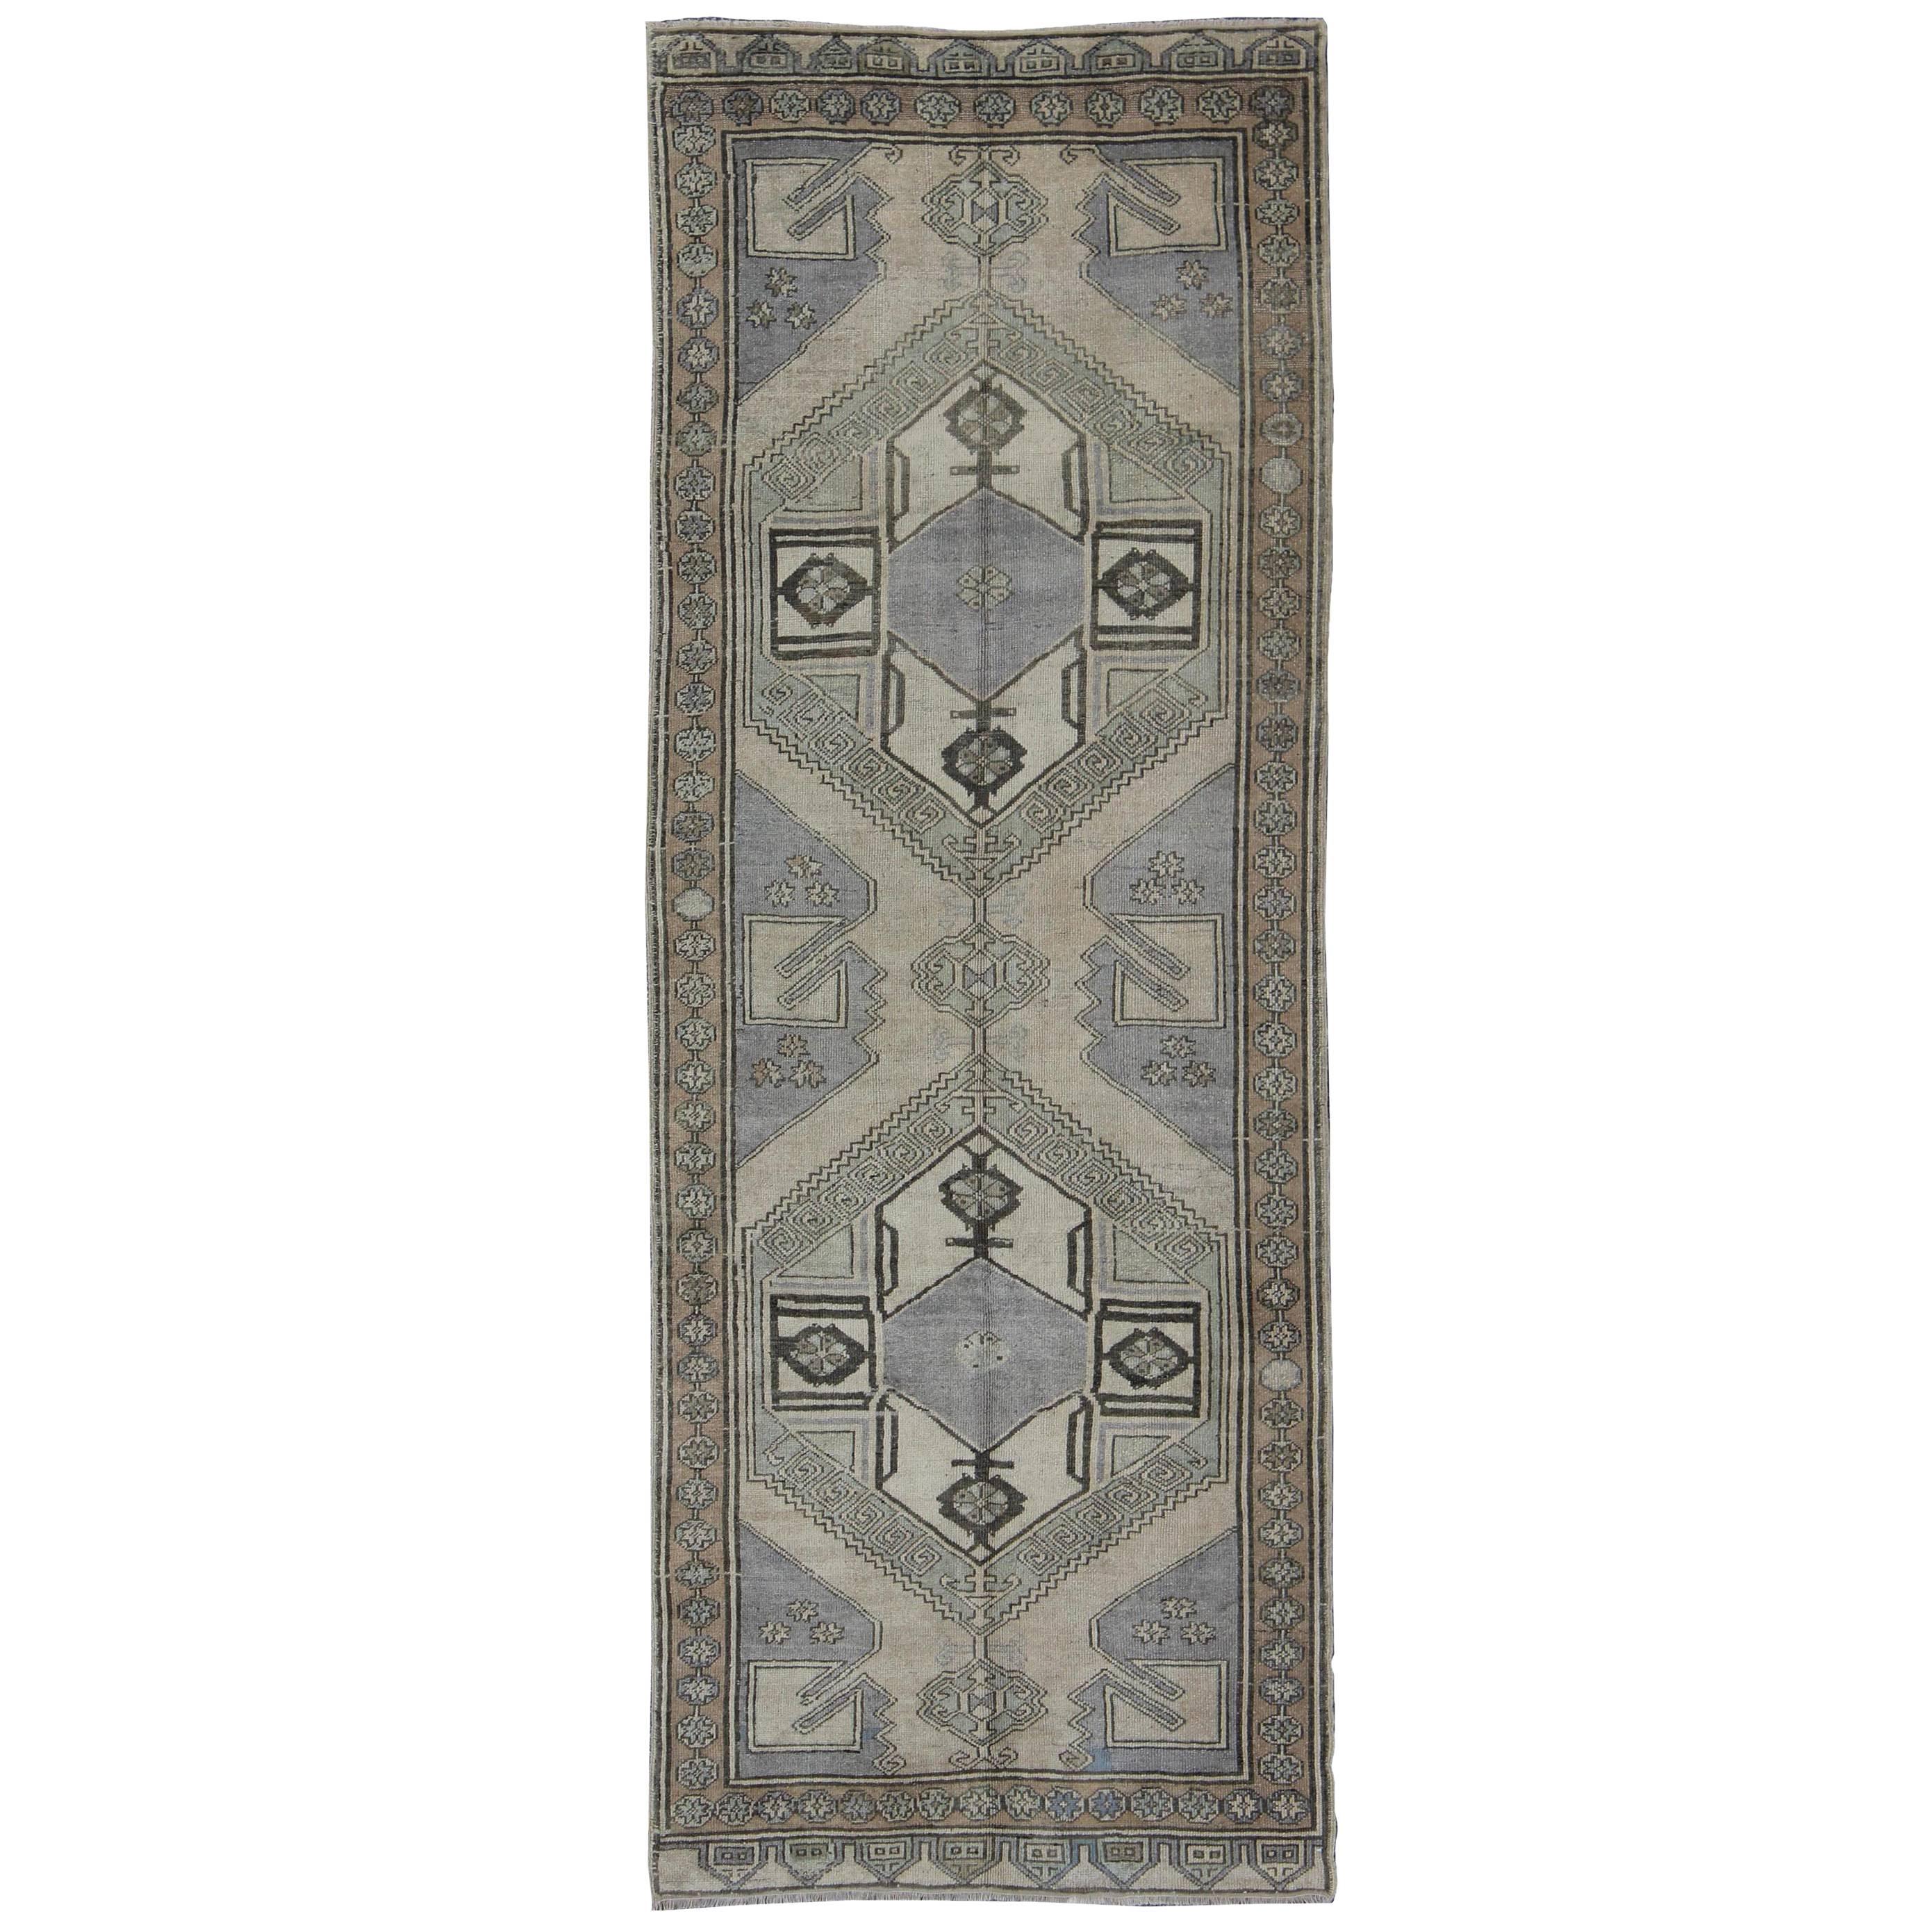 Mid-Century Turkish Oushak Vintage Runner with Dual Medallions in Lavender, Gray